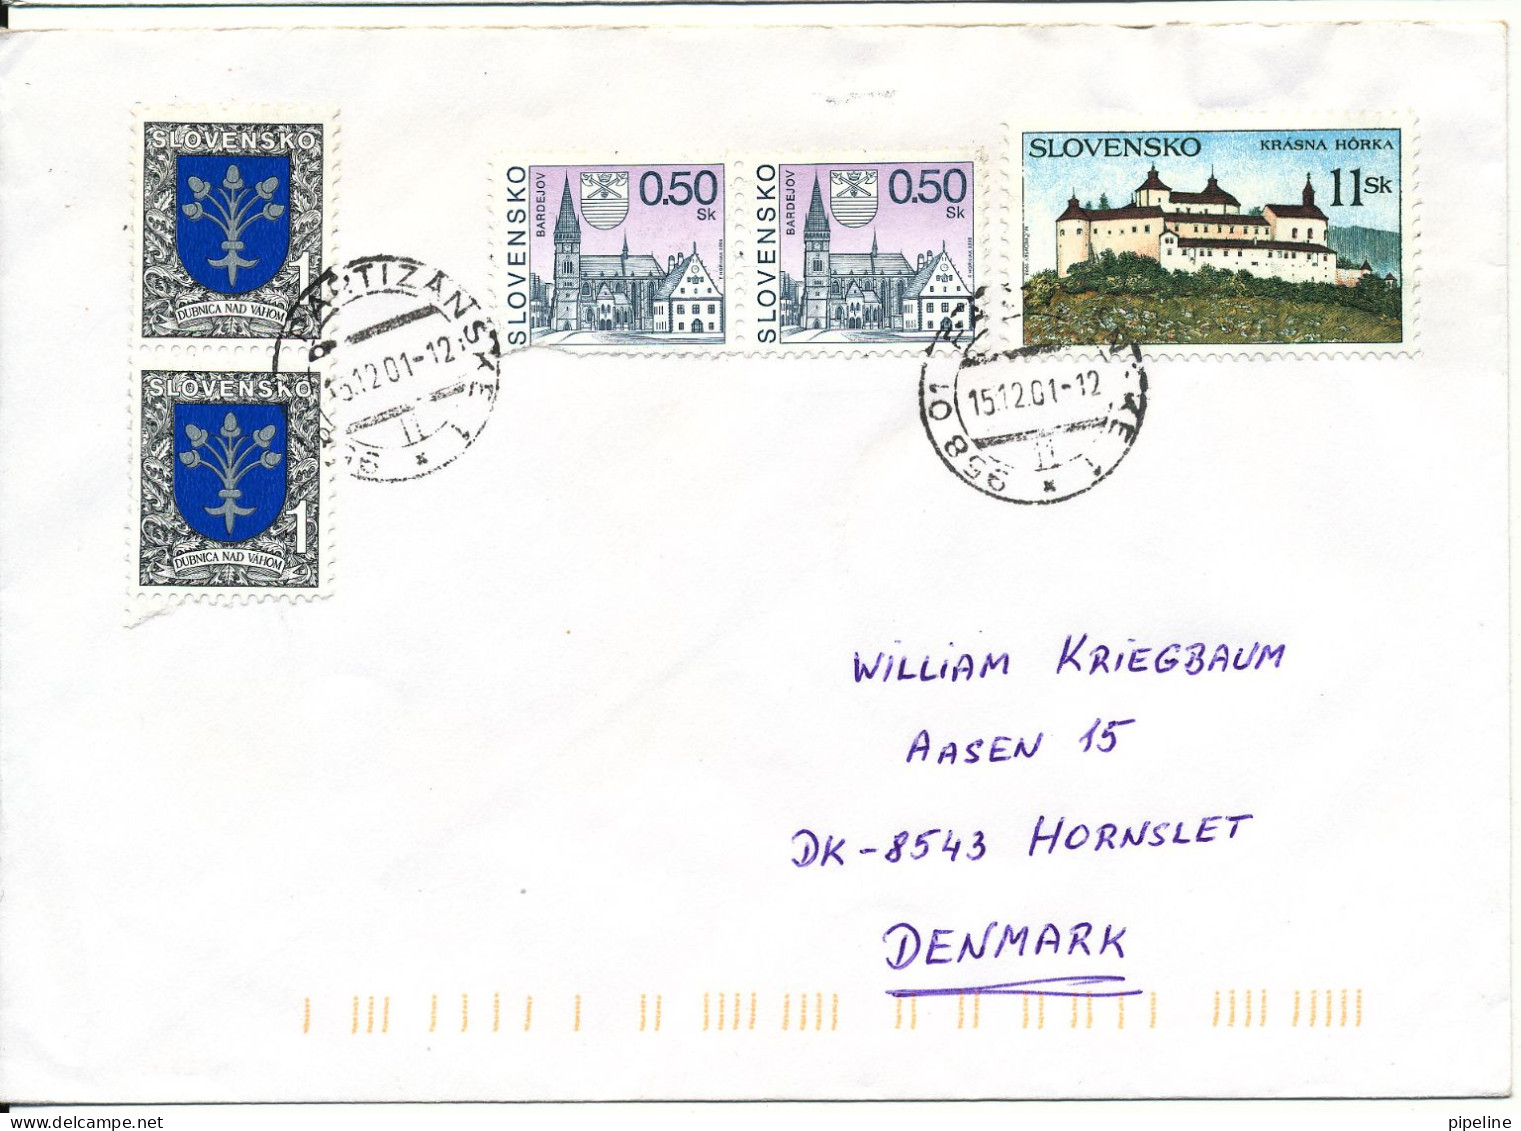 Slovakia Nice Cover Sent To Denmark 15-12-2001 - Covers & Documents